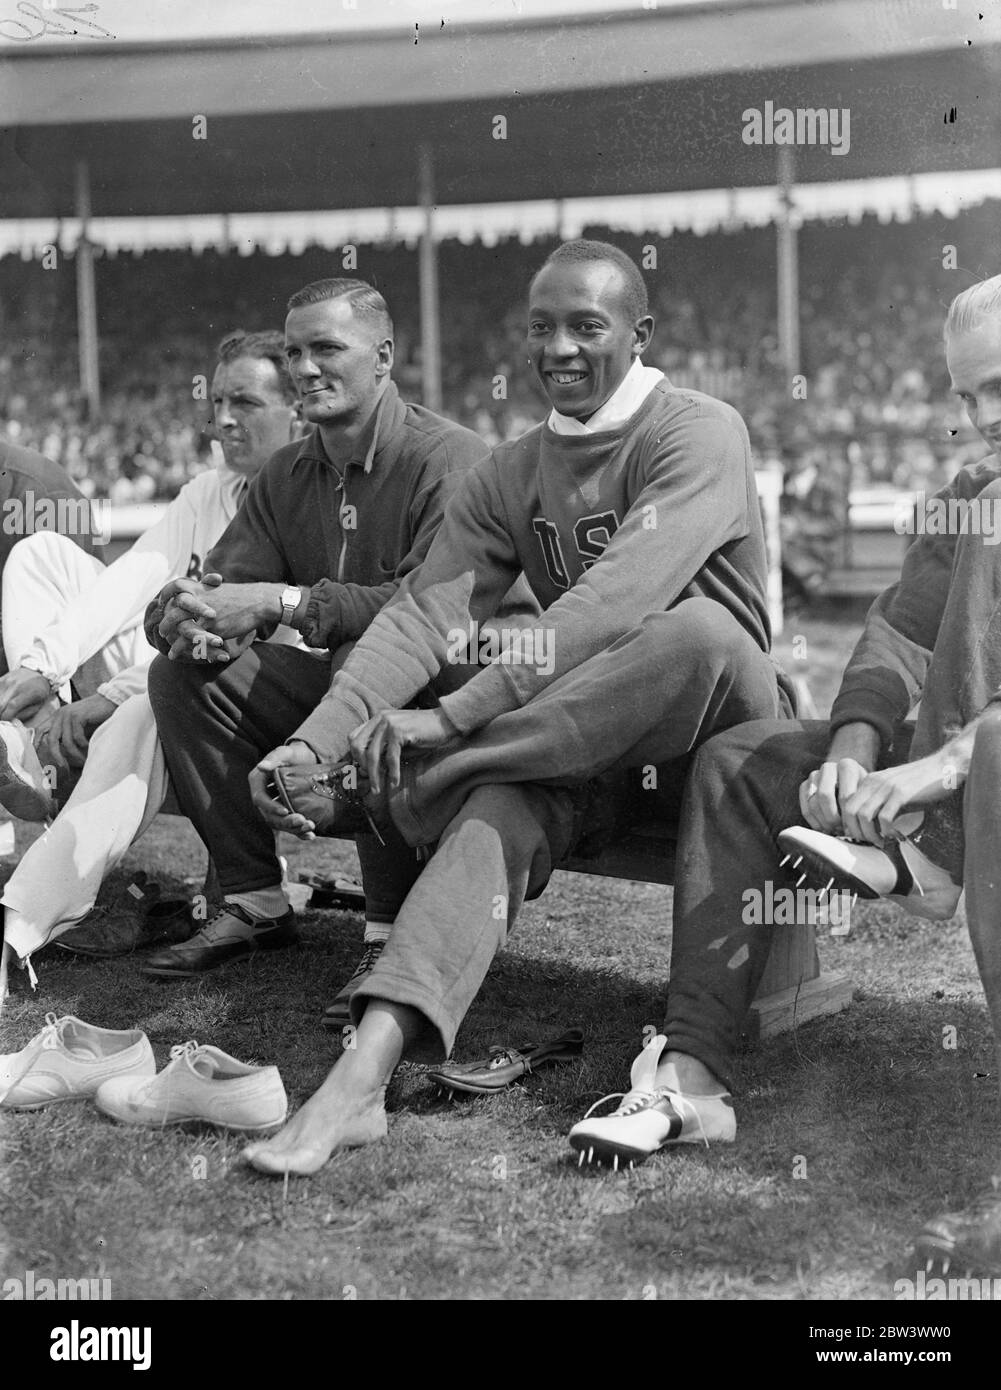 jesse owens running shoes